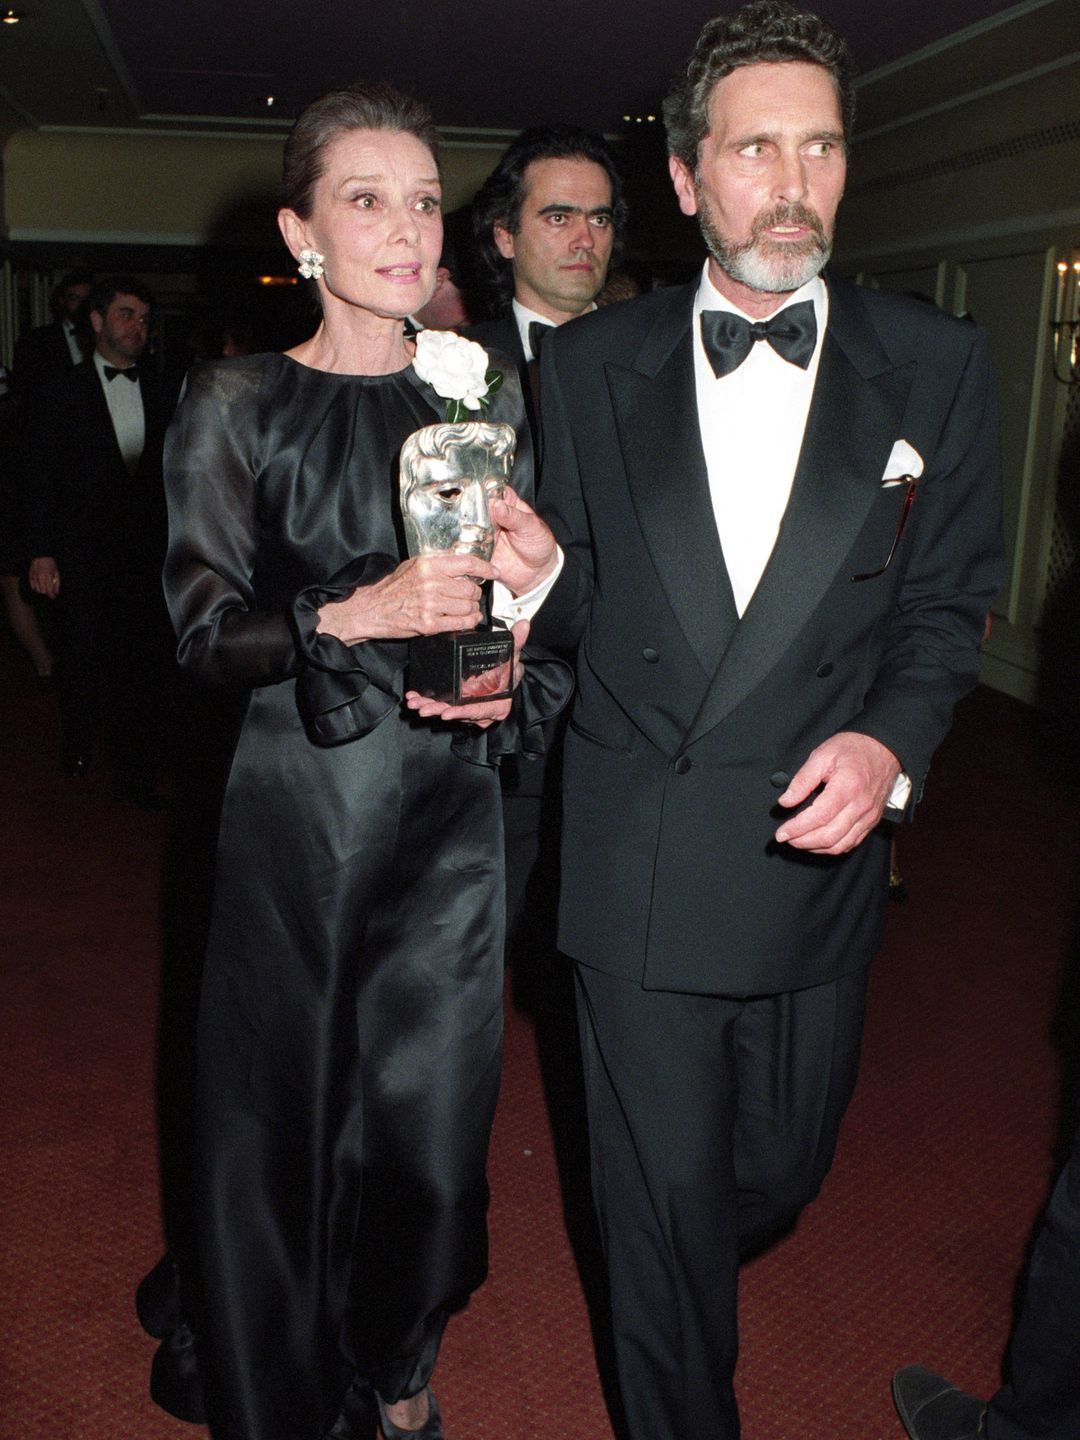 Audrey Hepburn and Robert Wolders during the BAFTA Awards on March 23, 1992 in London.